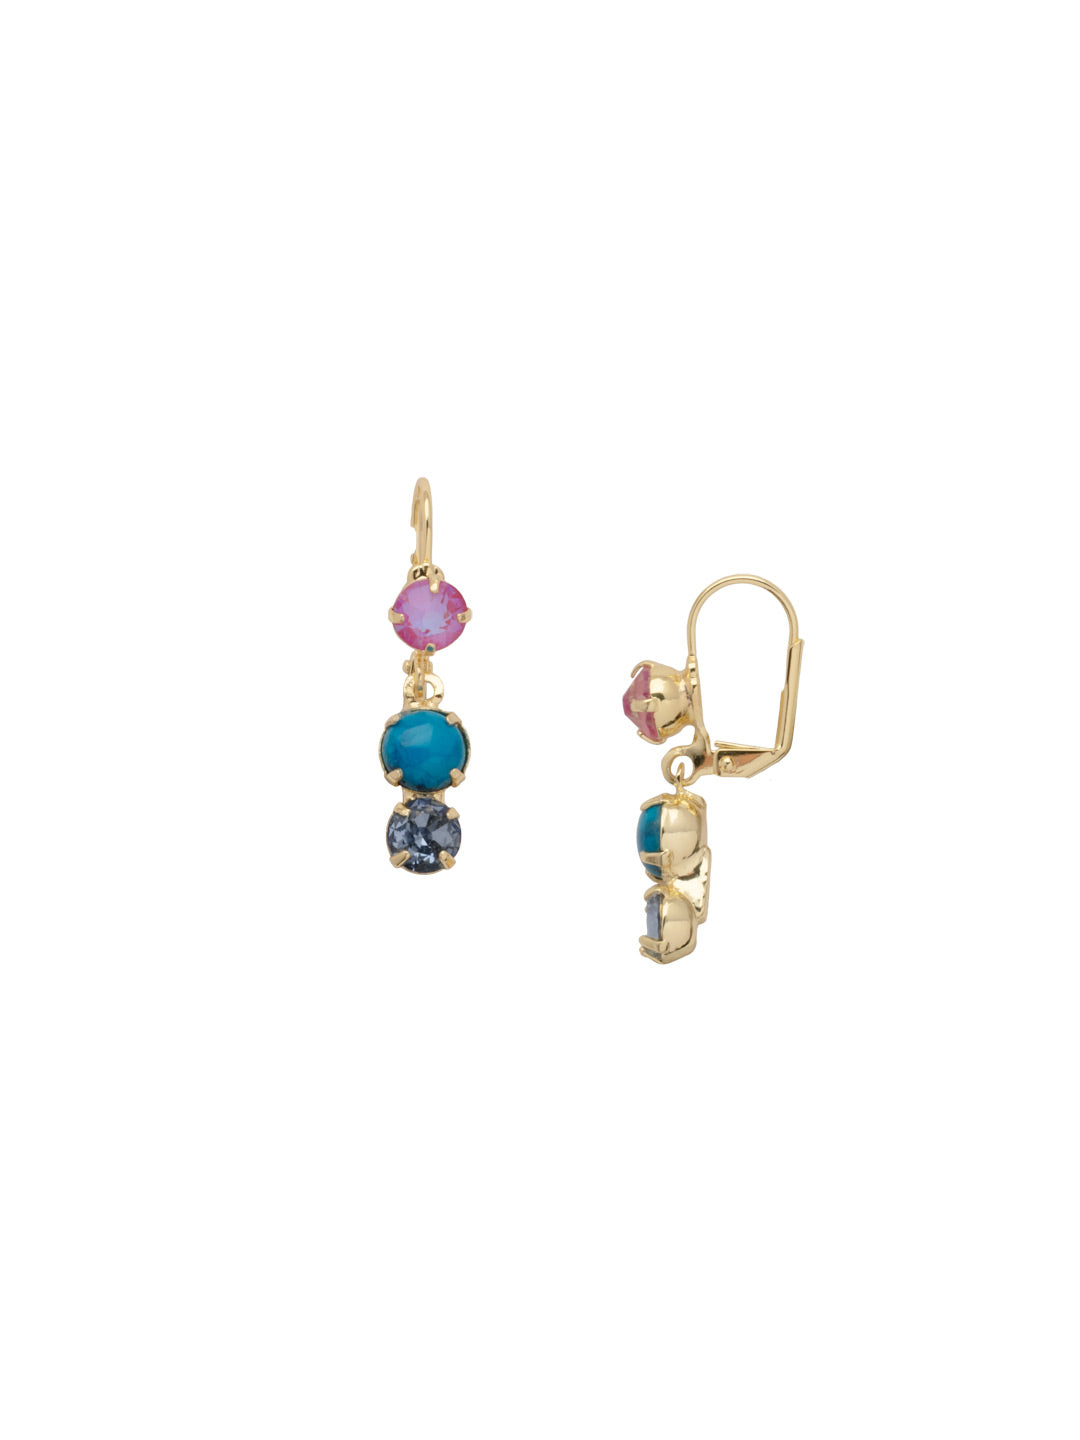 Xena Petite Dangle Earrings - EFF1BGHBR - <p>The Xena Petite Dangle Earrings feature an assortment of small round crystals and semi-precious stones on a lever back French wire. From Sorrelli's Happy Birthday Redux collection in our Bright Gold-tone finish.</p>